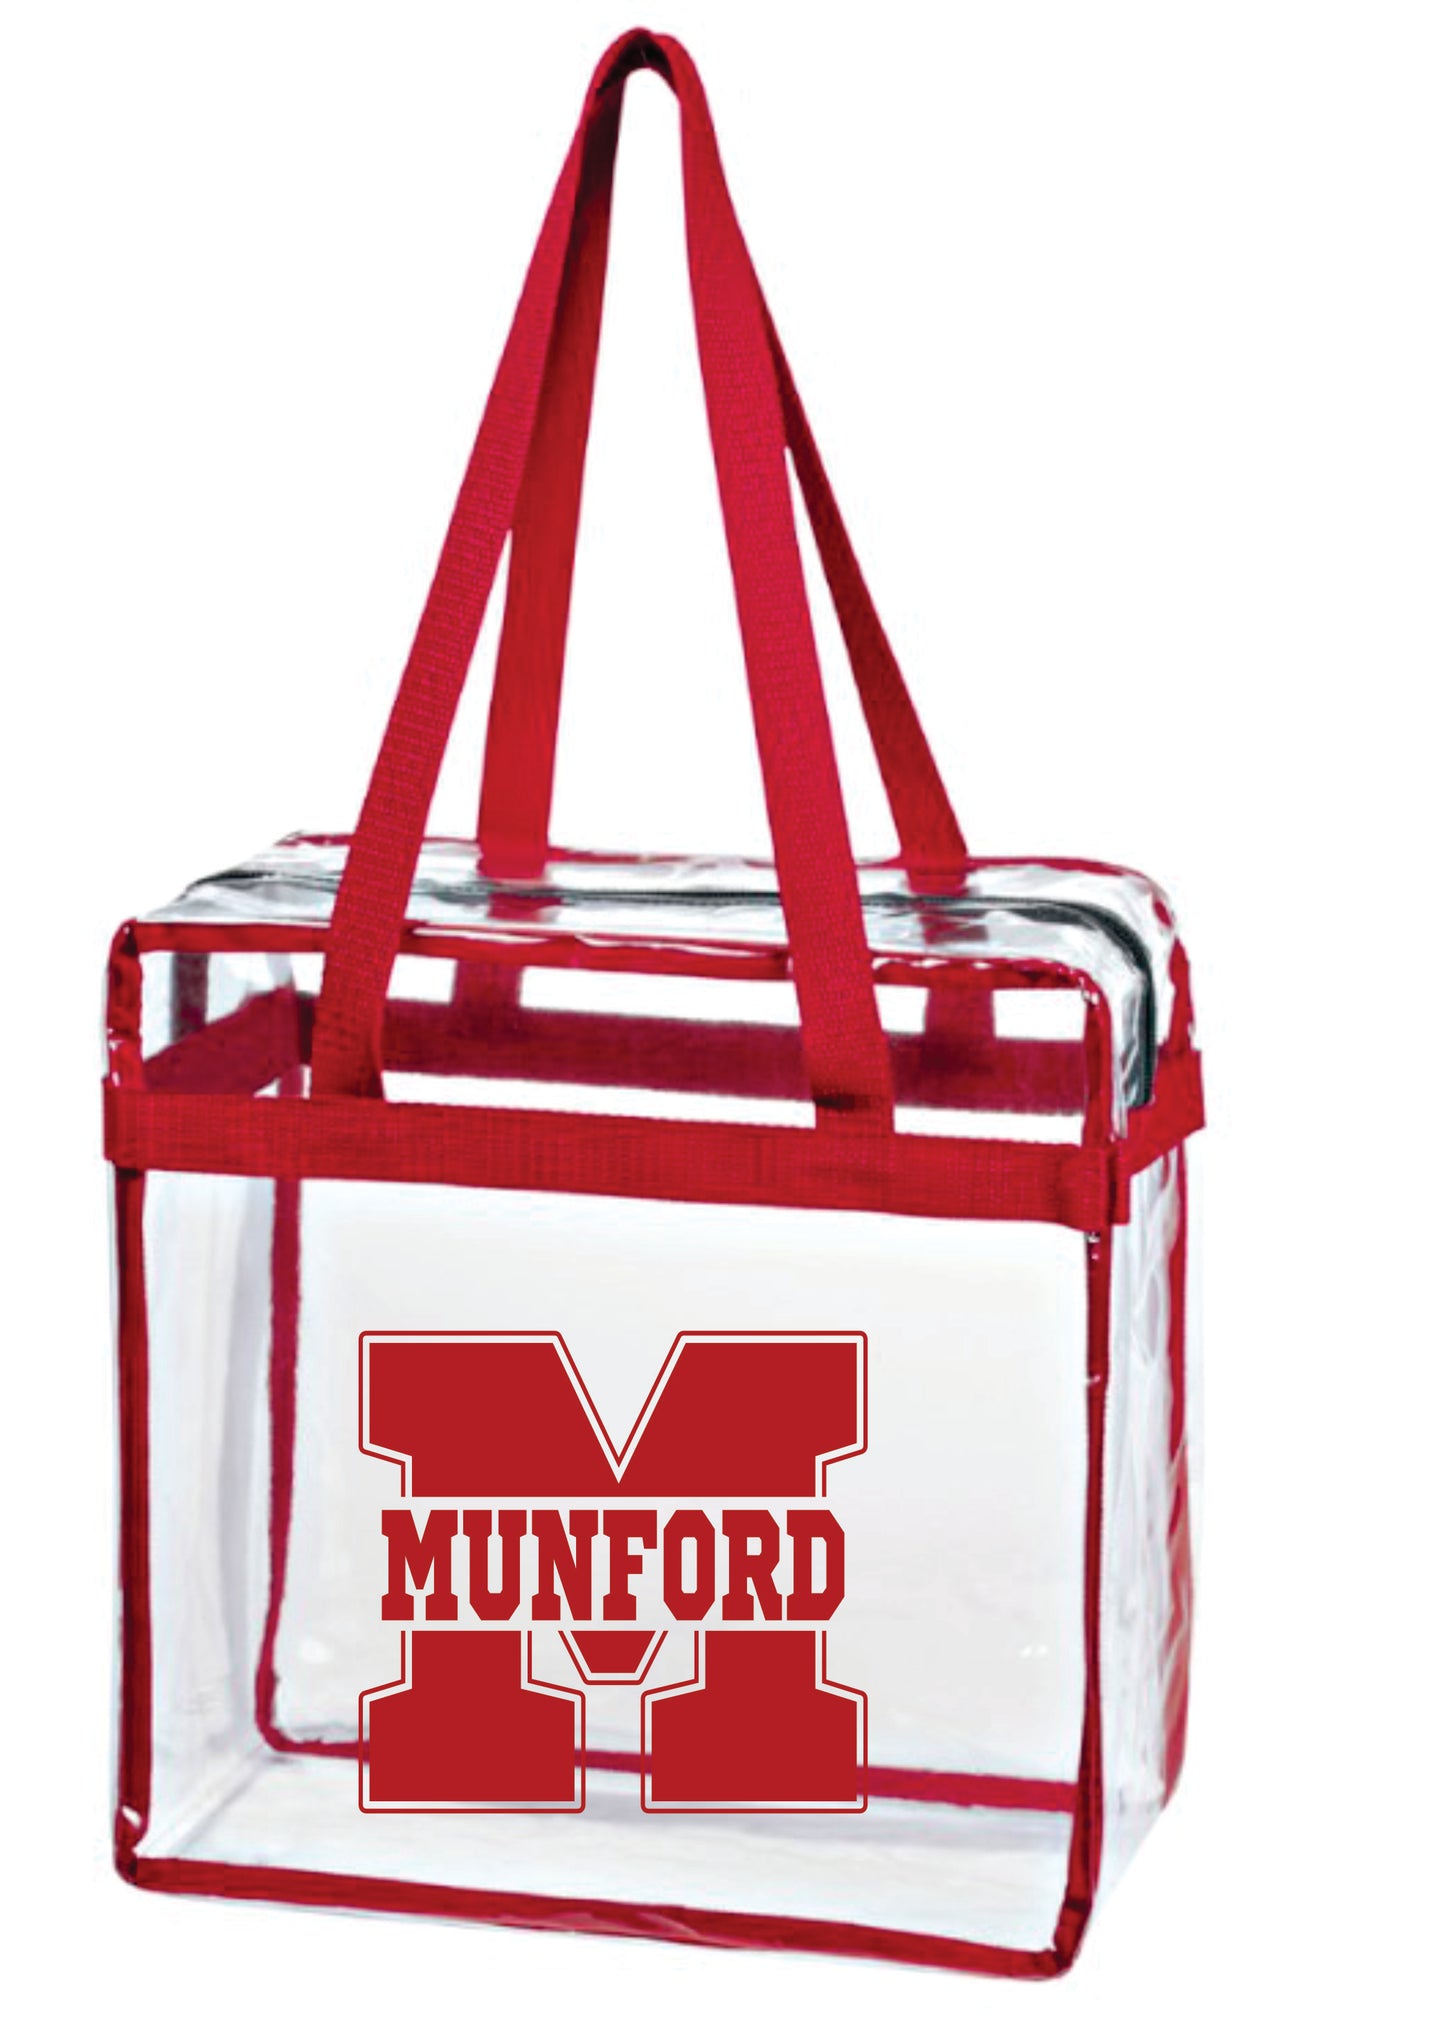 Munford Clear Tote Bag With Zipper